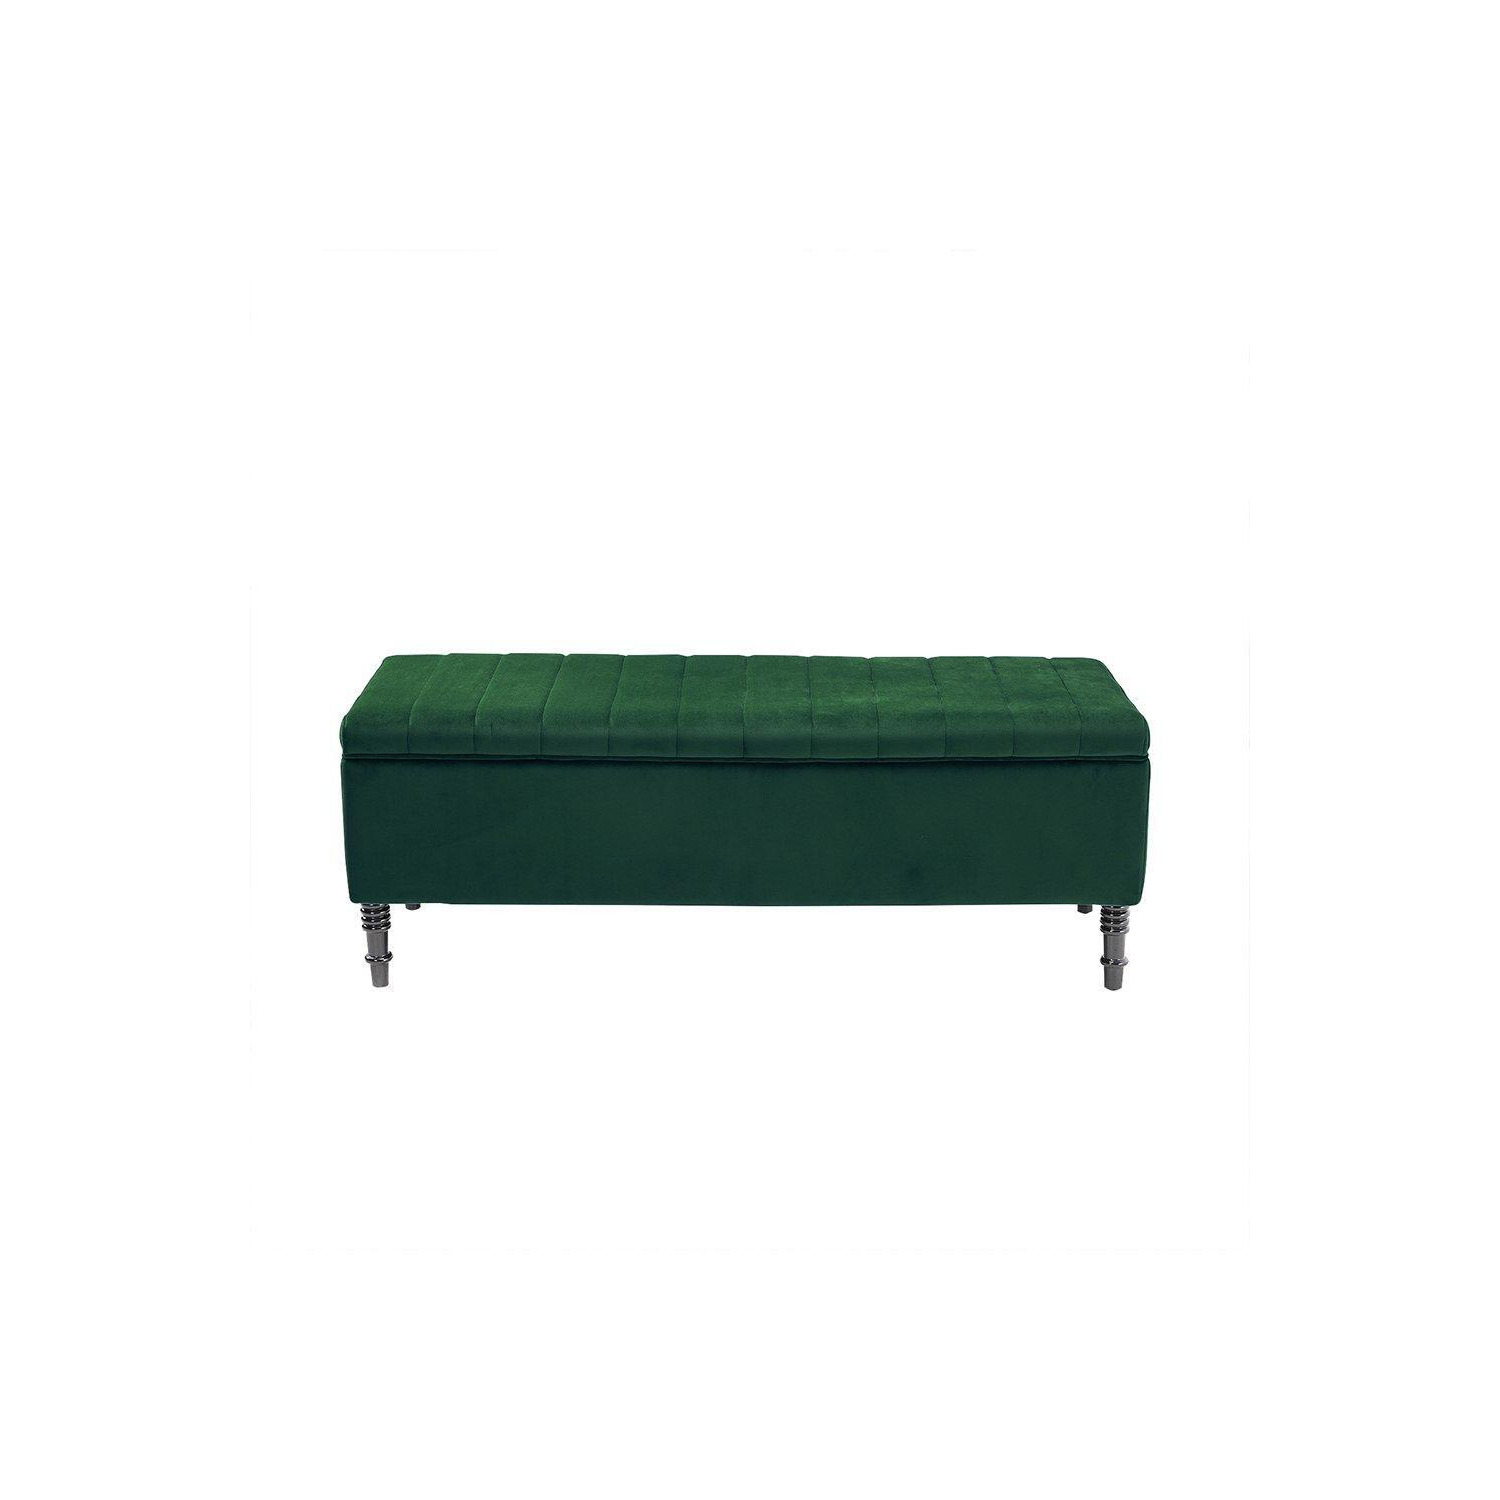 Green Upholstered Storage Ottoman Entryway Bench - image 1